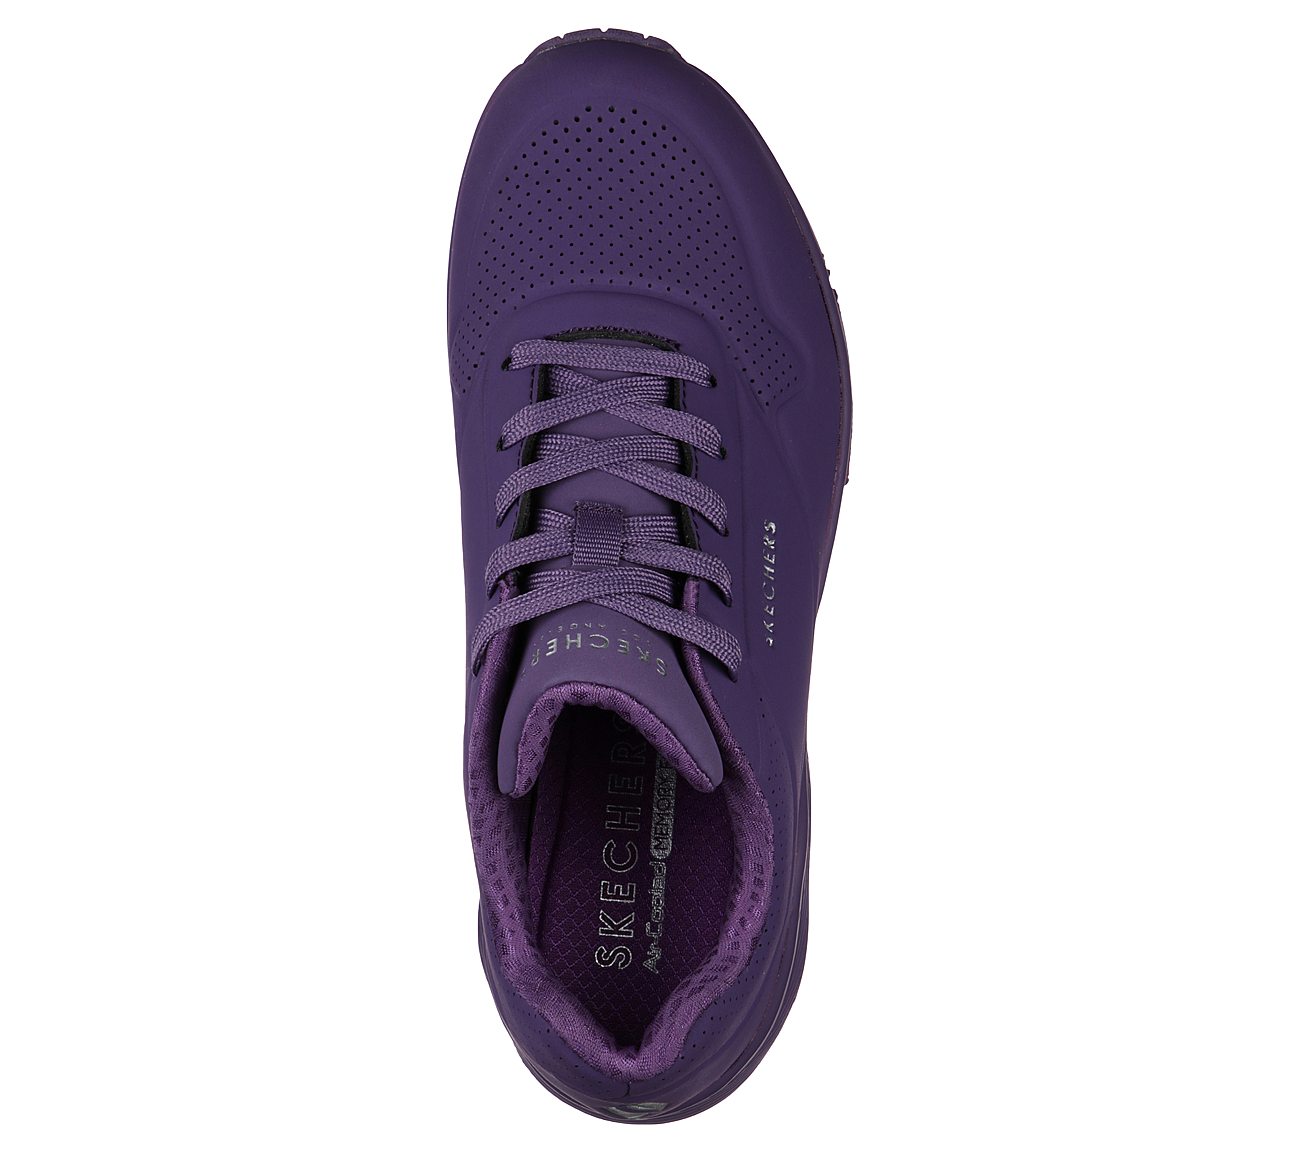 UNO - STAND ON AIR, PURPLE Footwear Top View